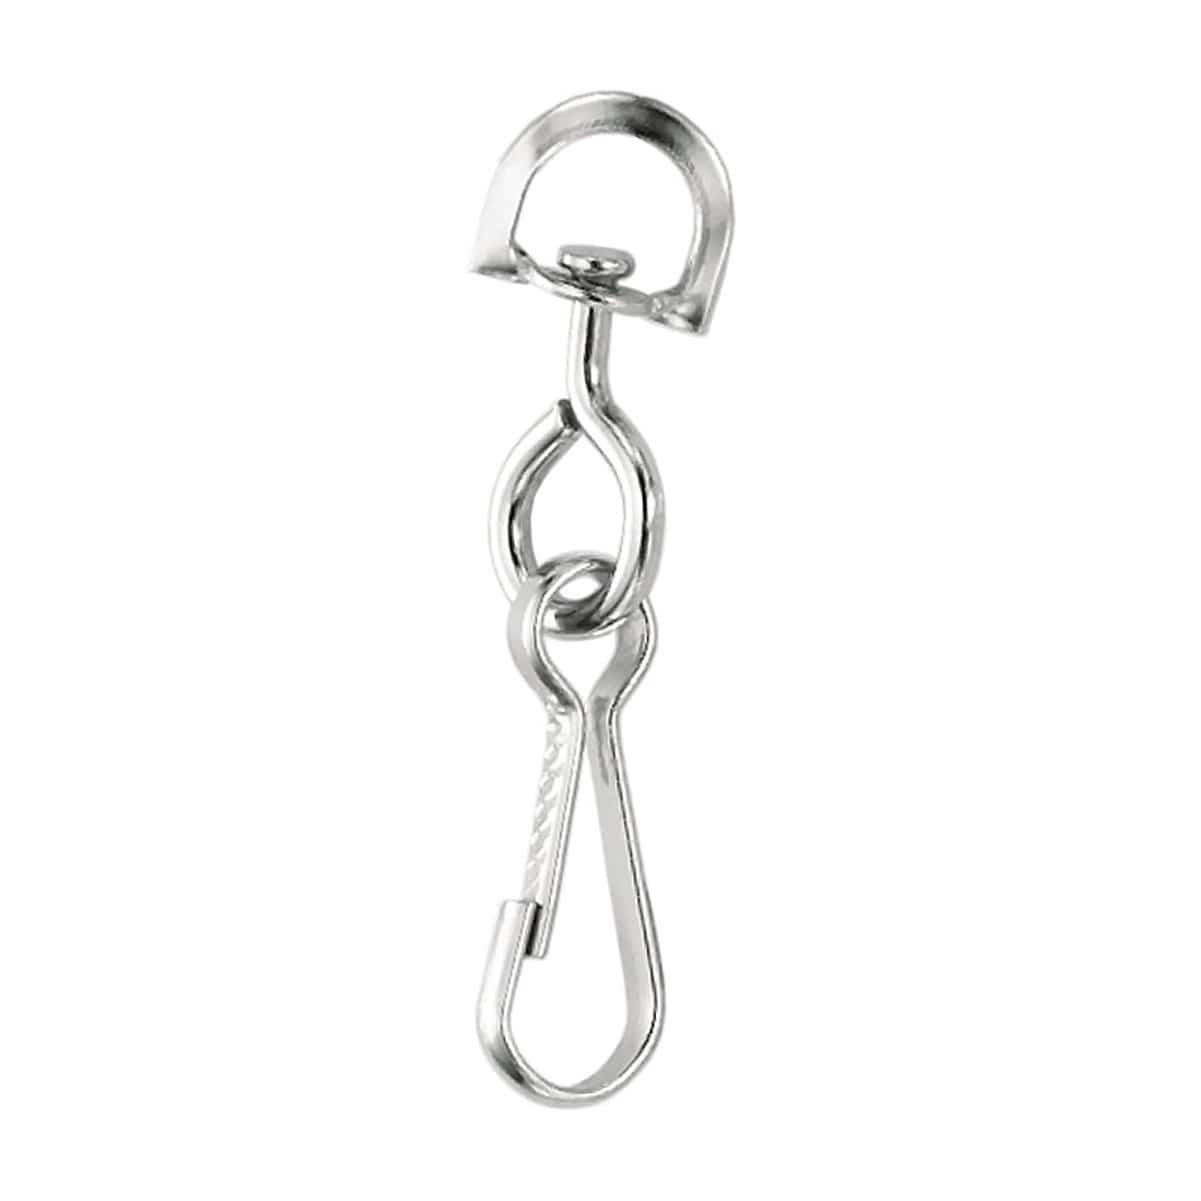 Specialist ID Small Metal J Hook Spring Clips - 1 1/4 for DIY Lanyards & Keychains (6920-2350)